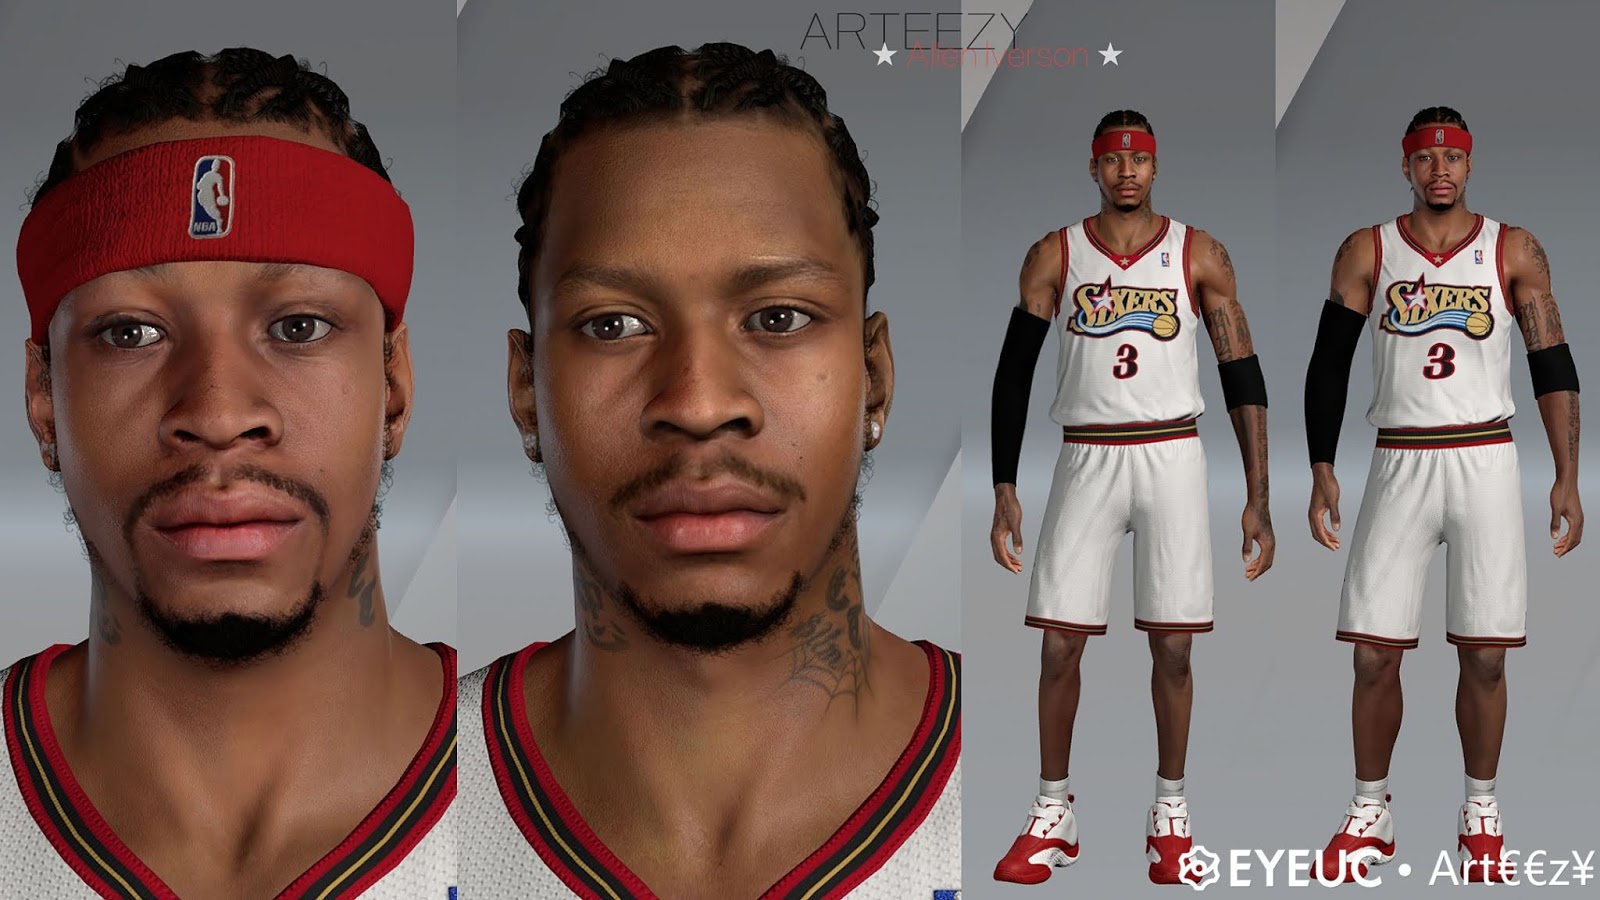 Download Allen Iverson Hd Face And Body Model By Arteezy For 2k20 Nba 2k Updates Roster Update Cyberface Etc Yellowimages Mockups